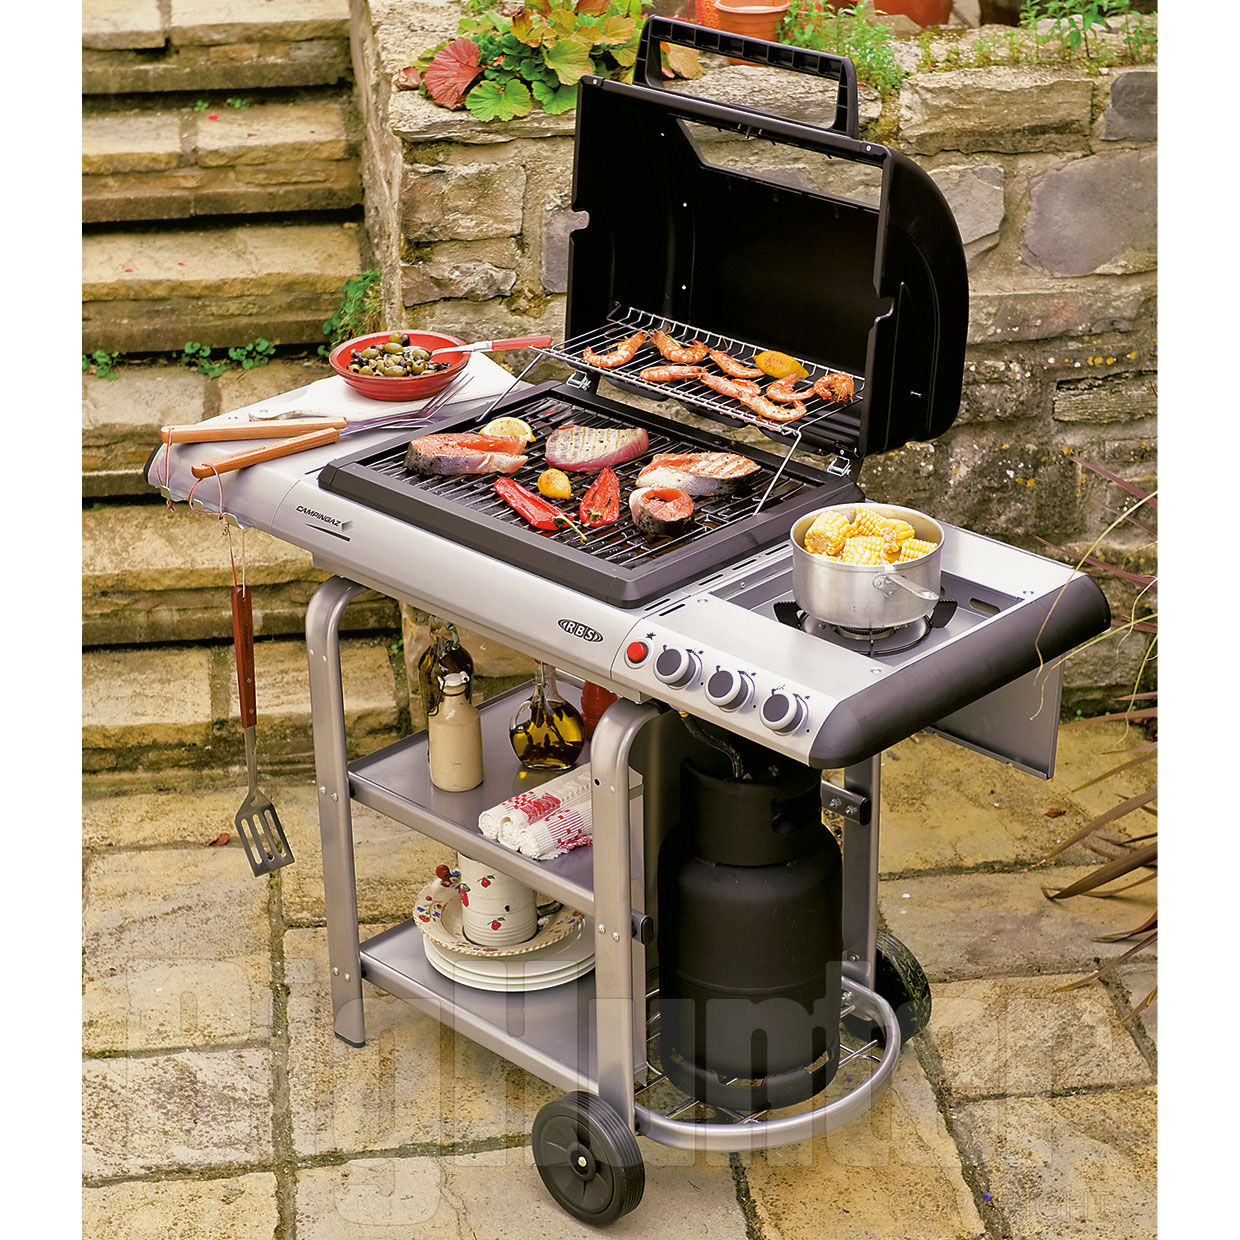 Campingaz 78768-65 C-Line 1900-D RBS Barbecue a Gas, 10,1 Kw